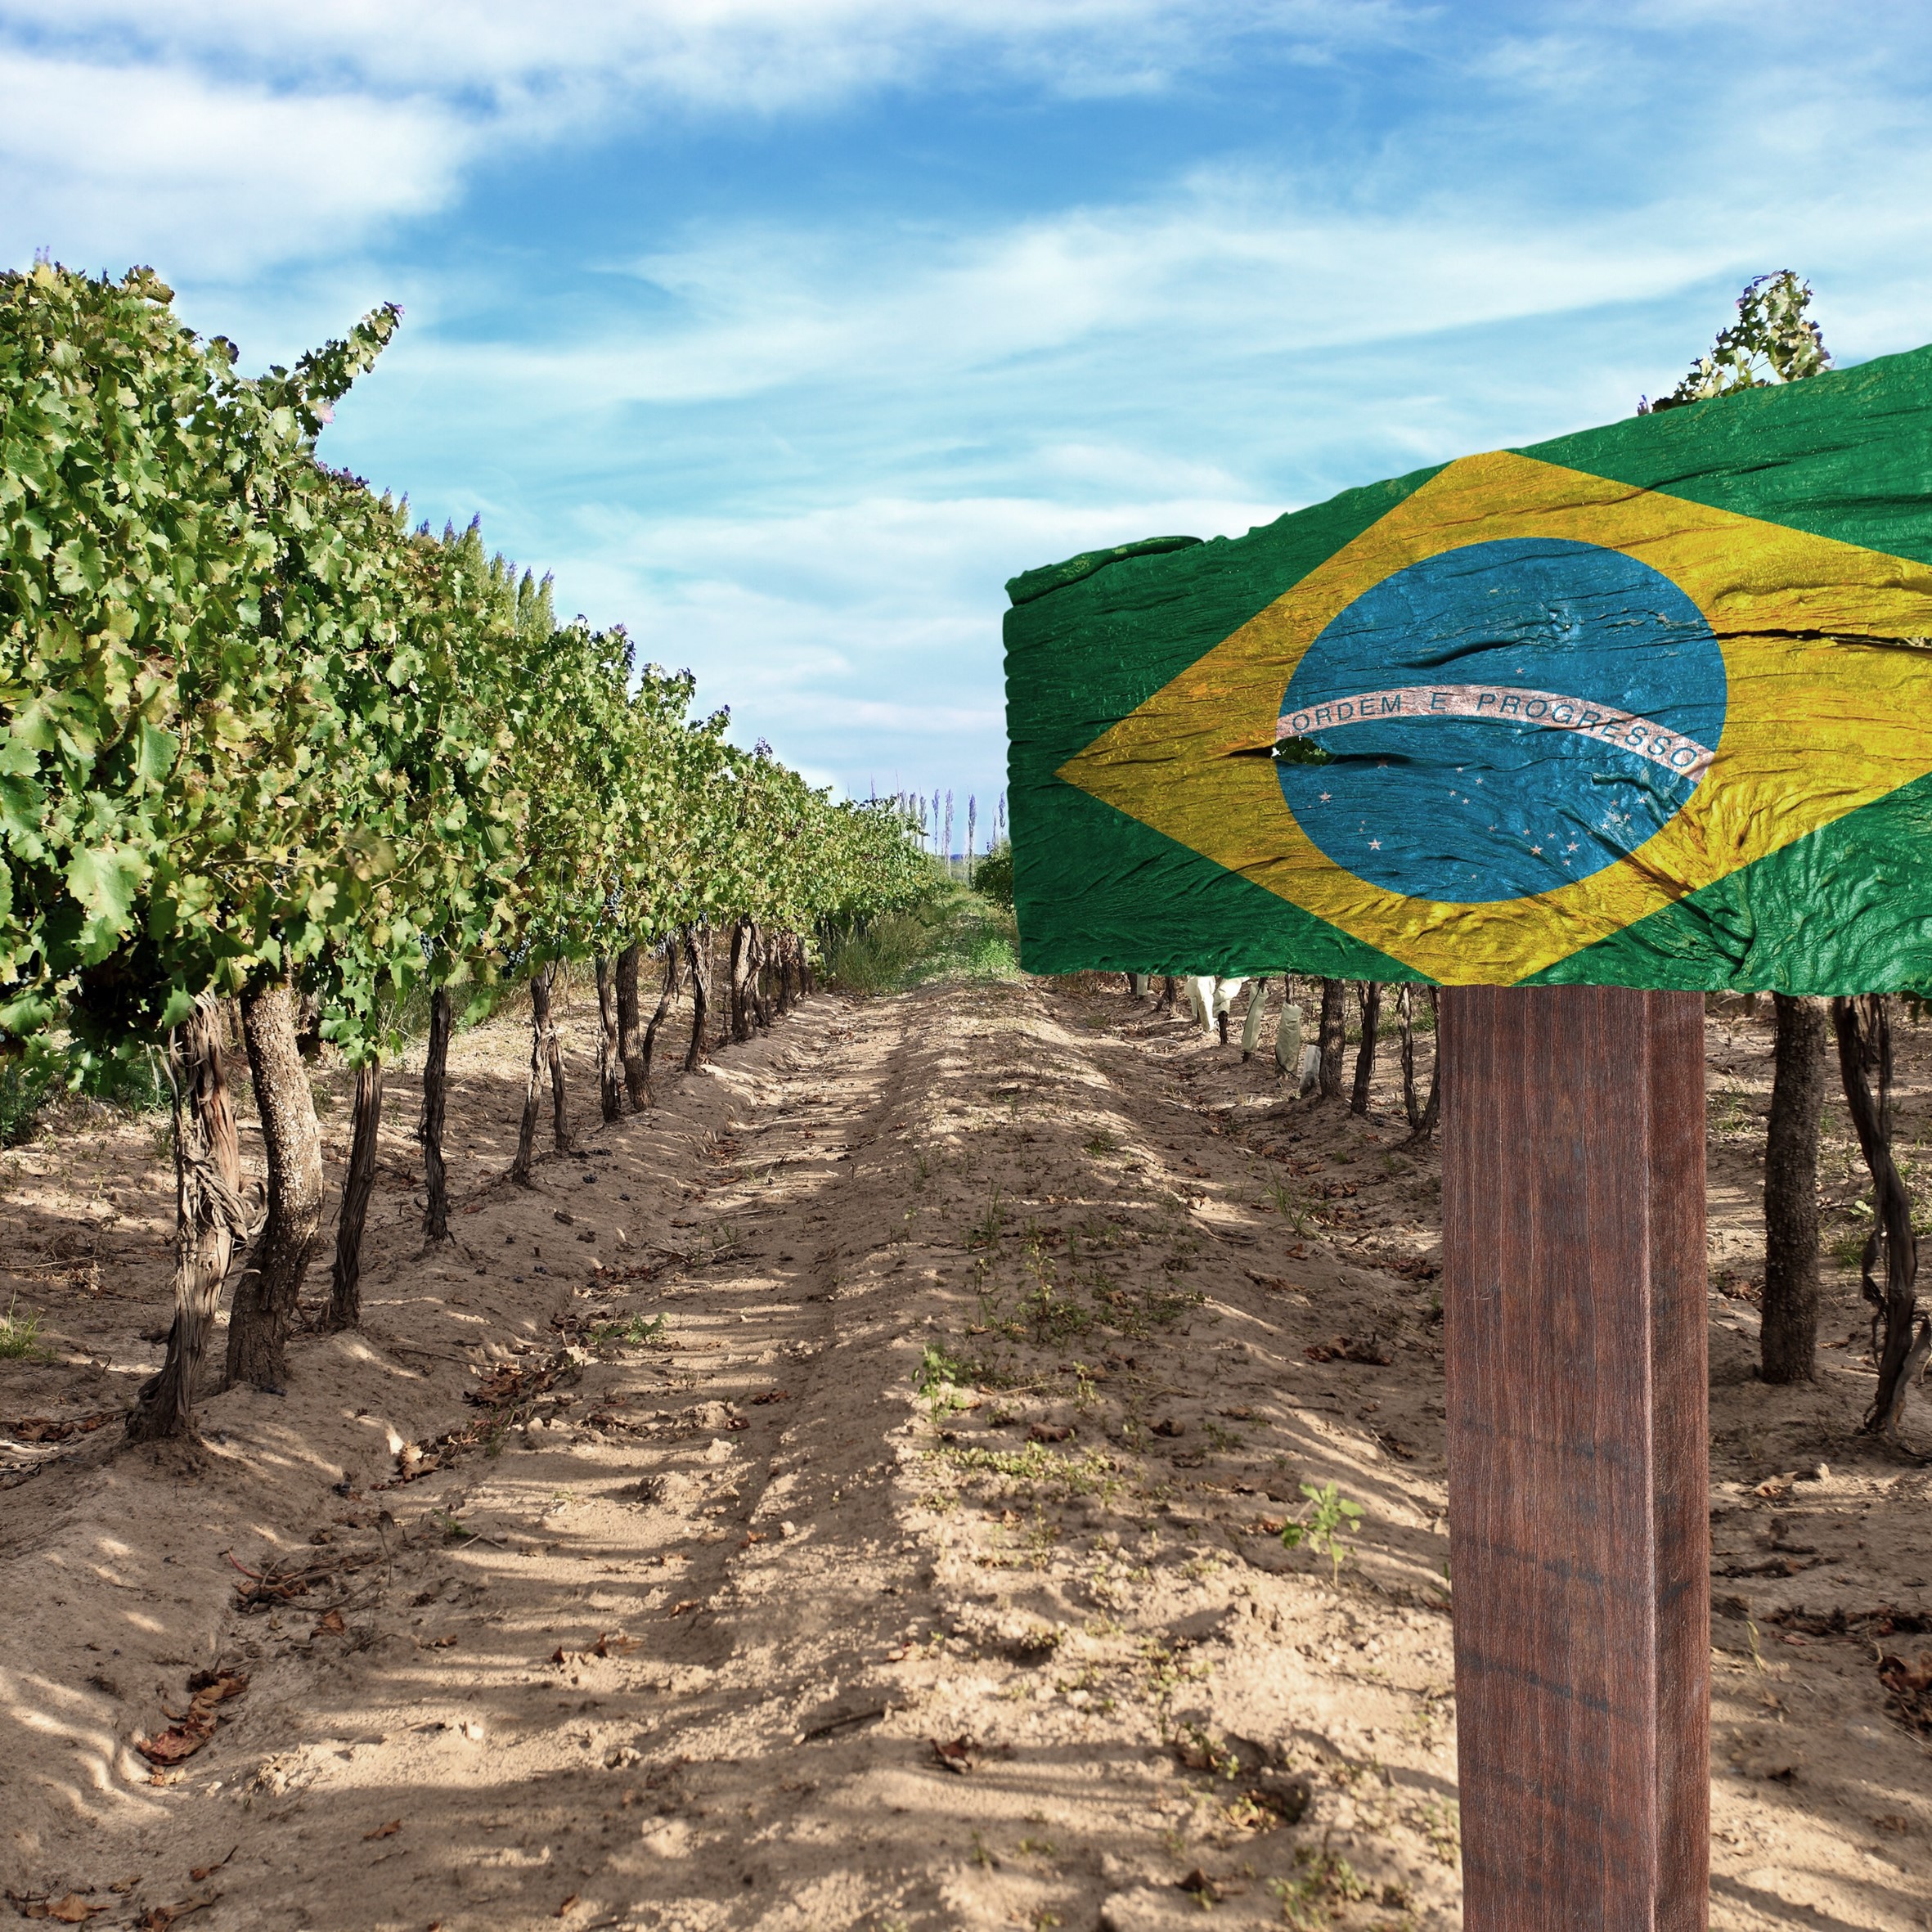 Brazil - Wine brands in Germany: Changing times